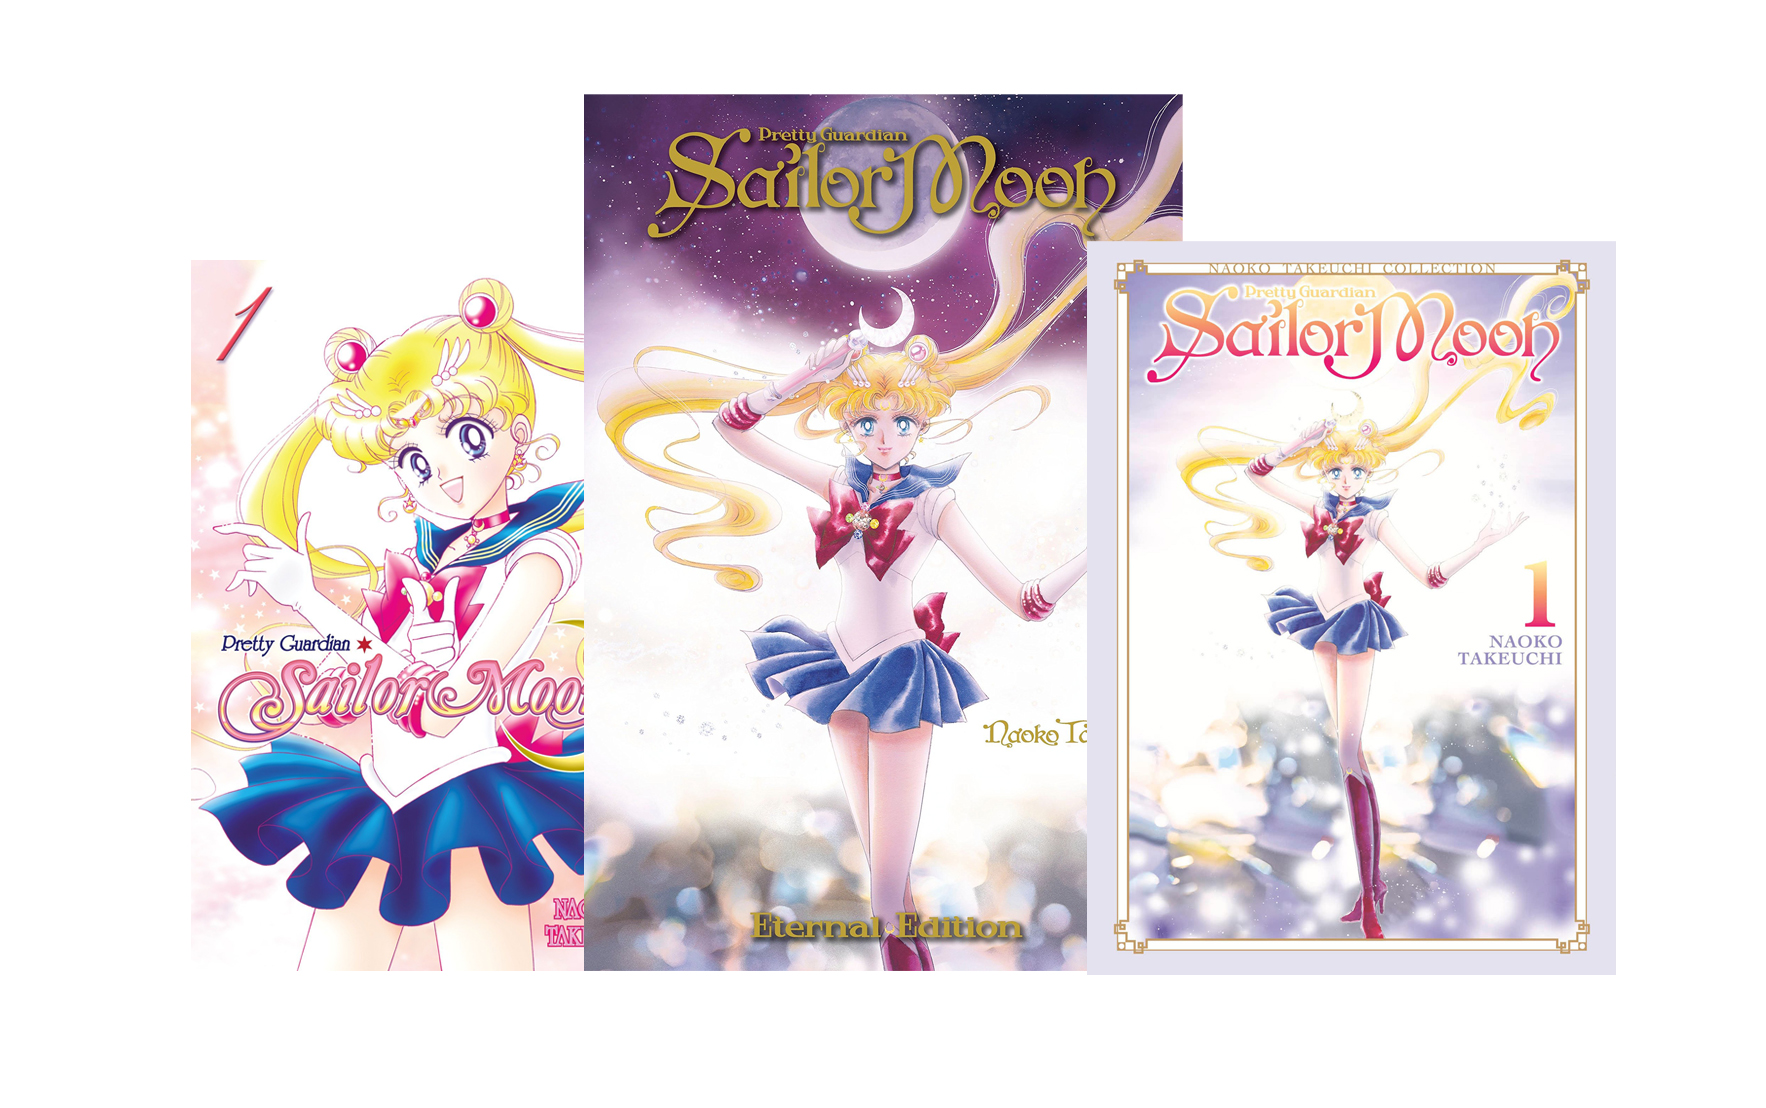 Sailor Moon is back - here's what you need to know